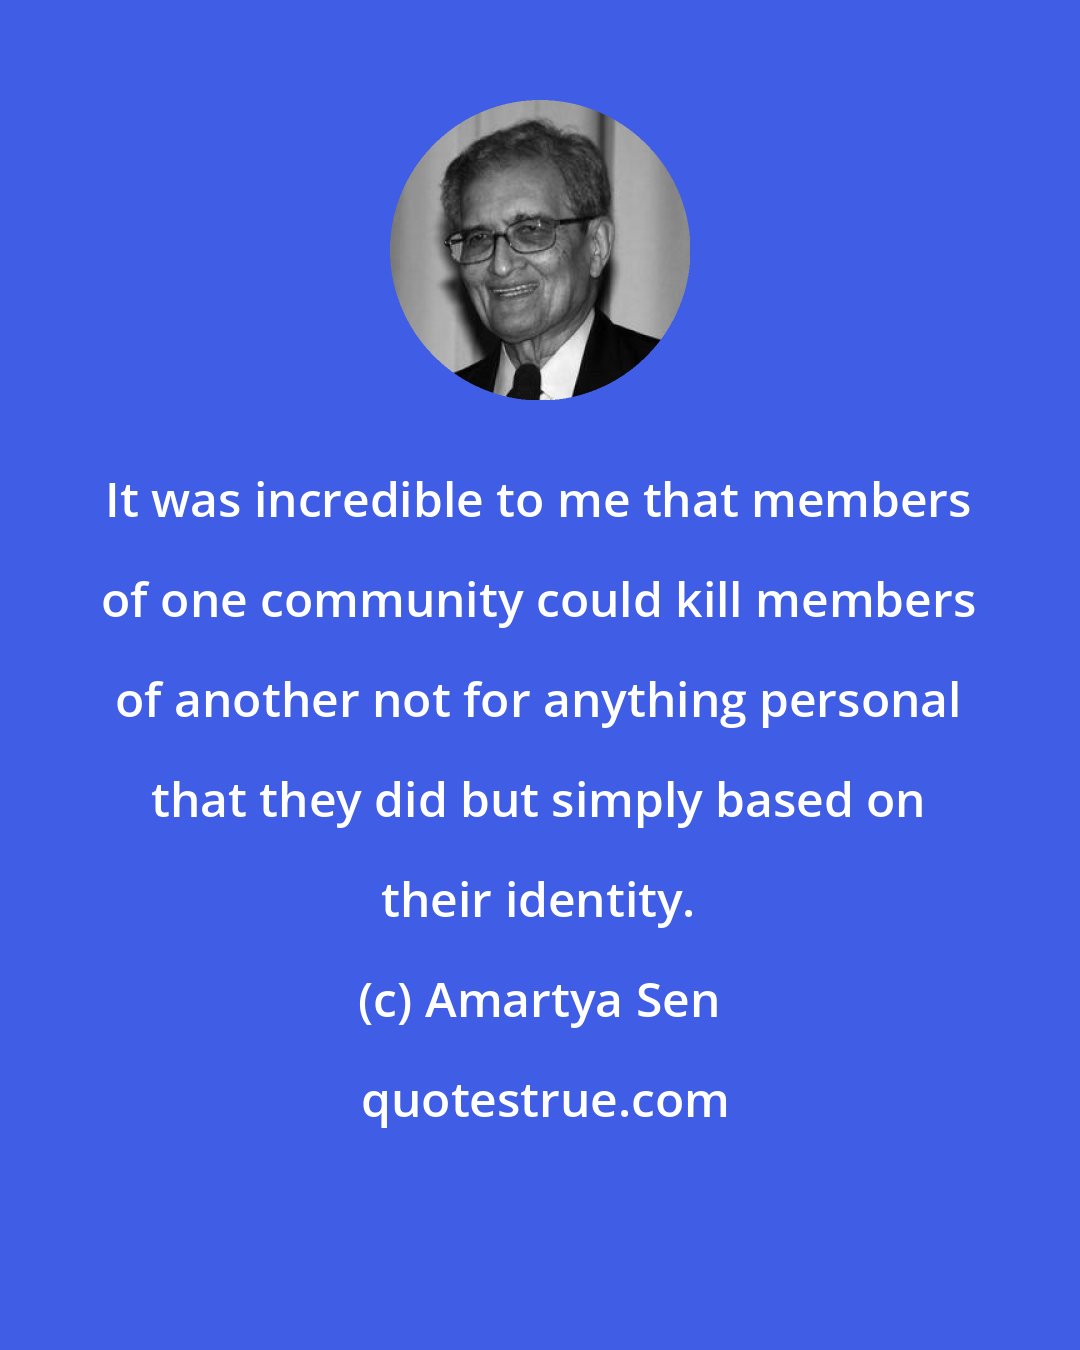 Amartya Sen: It was incredible to me that members of one community could kill members of another not for anything personal that they did but simply based on their identity.